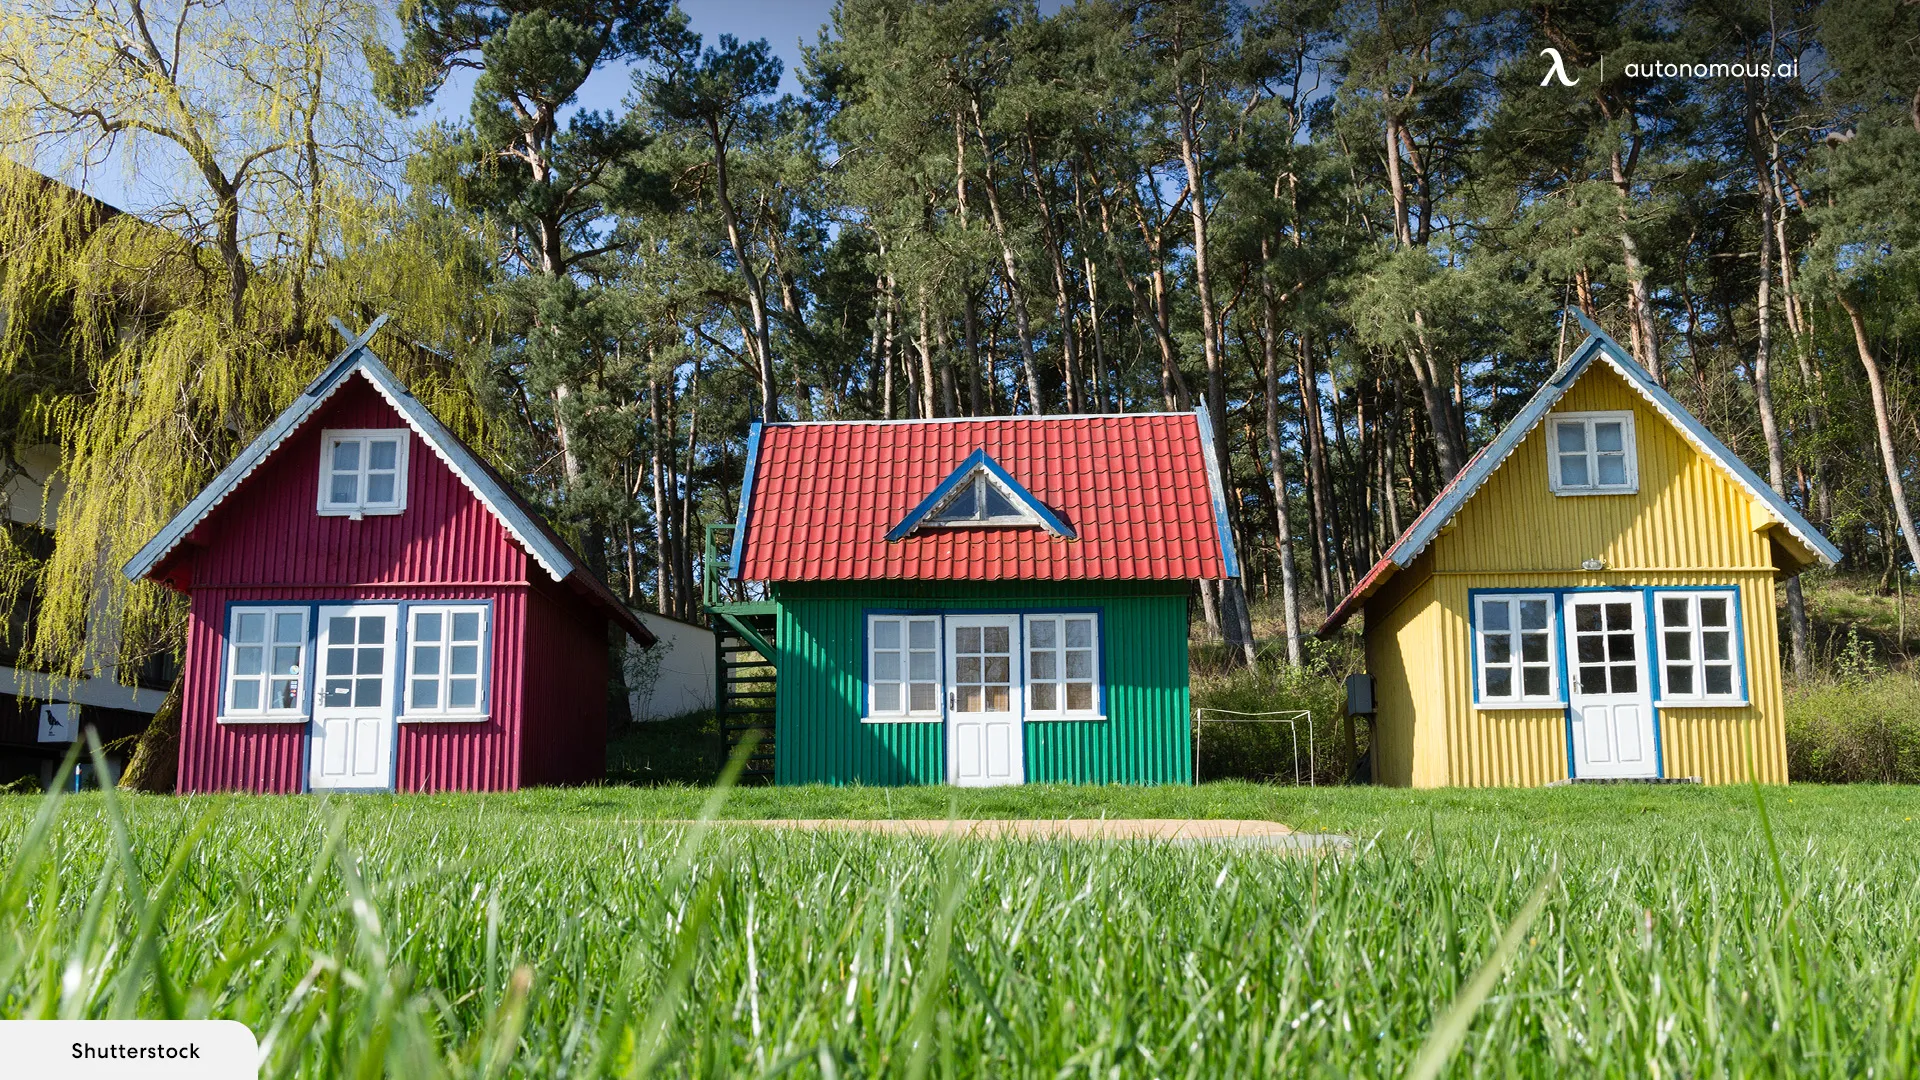 What is the cost of tiny home living in comparison to larger homes?